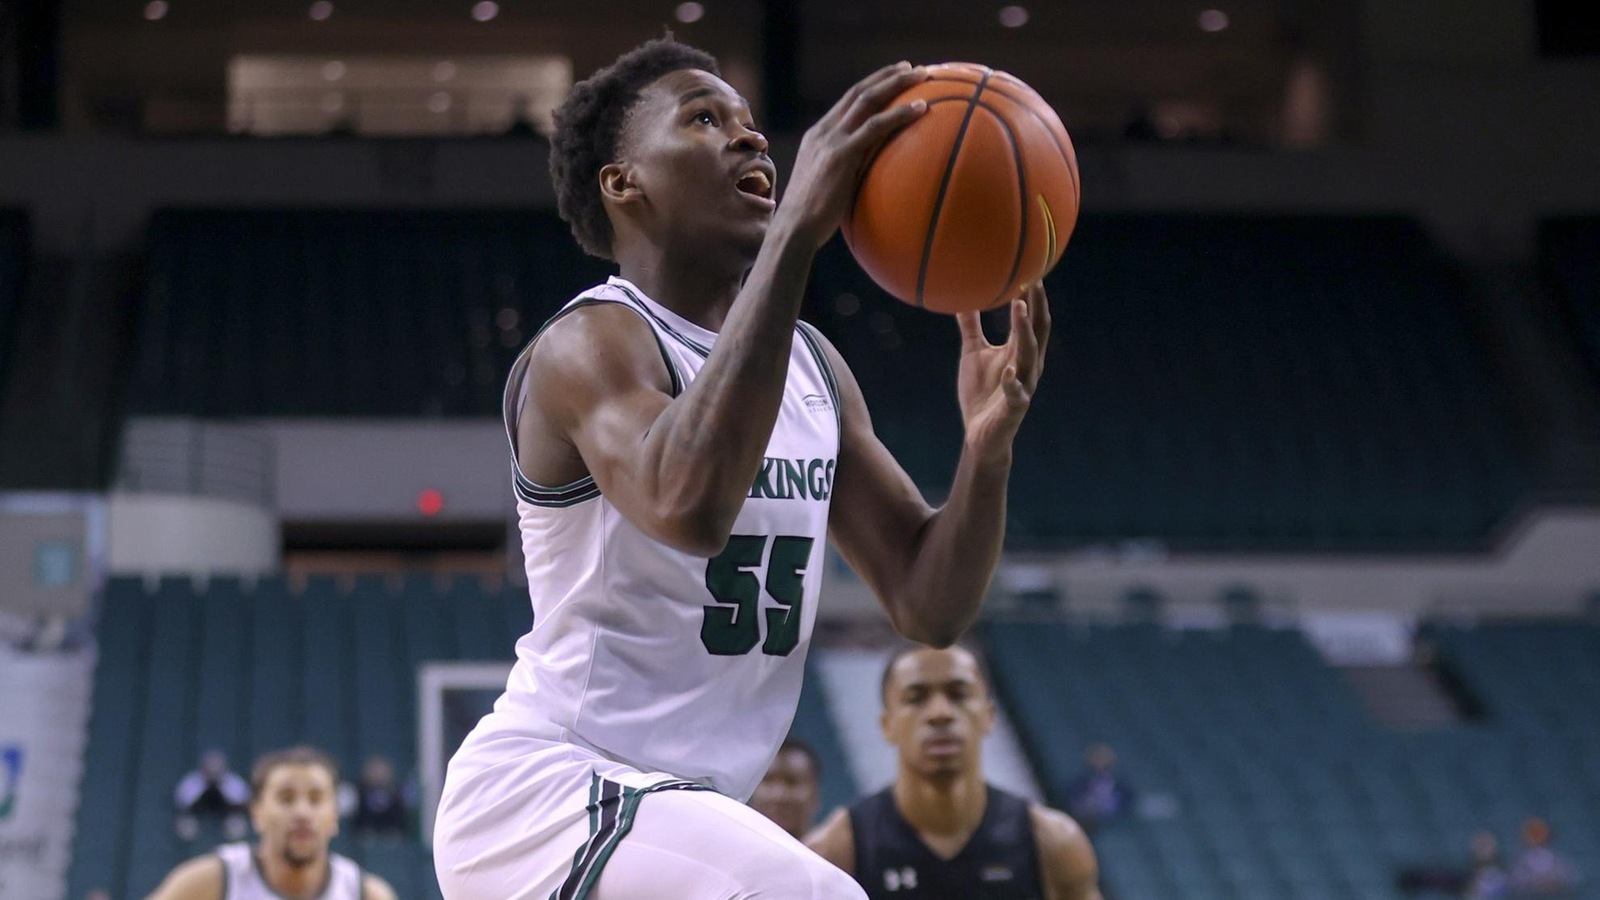 Cleveland State Men’s Basketball Earns 90-81 Victory Over Purdue Fort Wayne